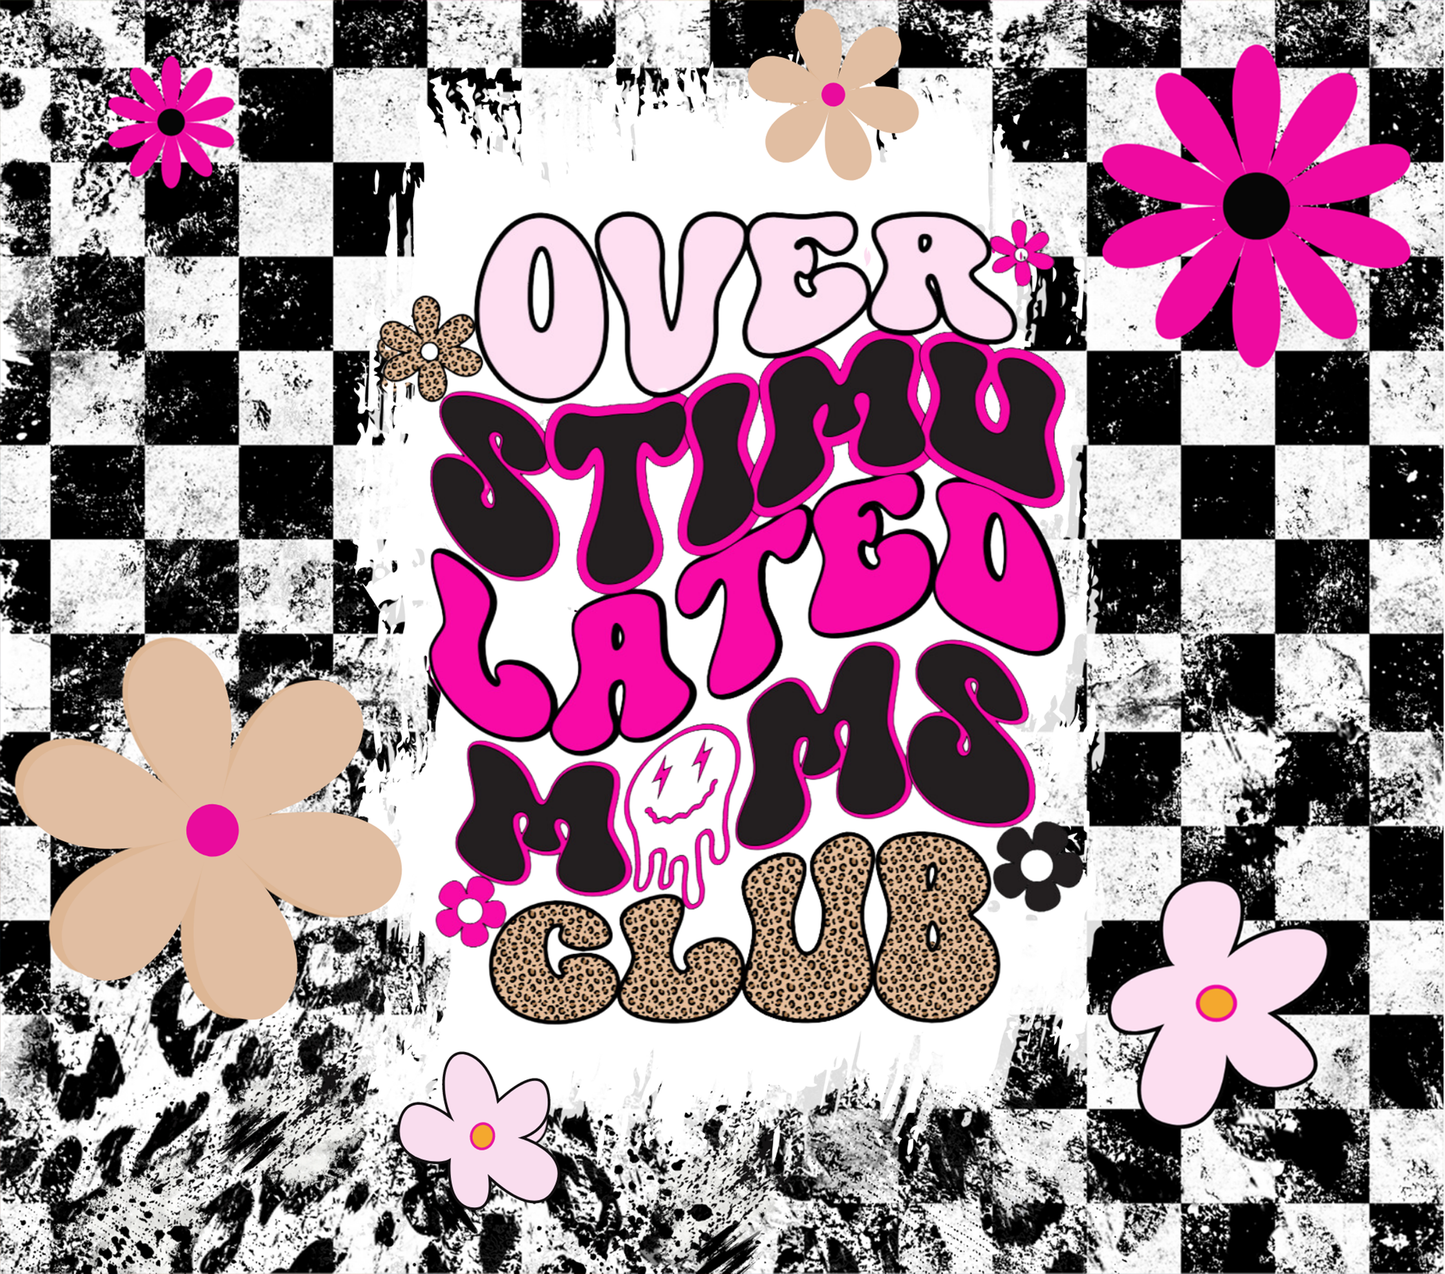 Over Stimulated Moms club - 20 Oz Printed Sublimation Transfer